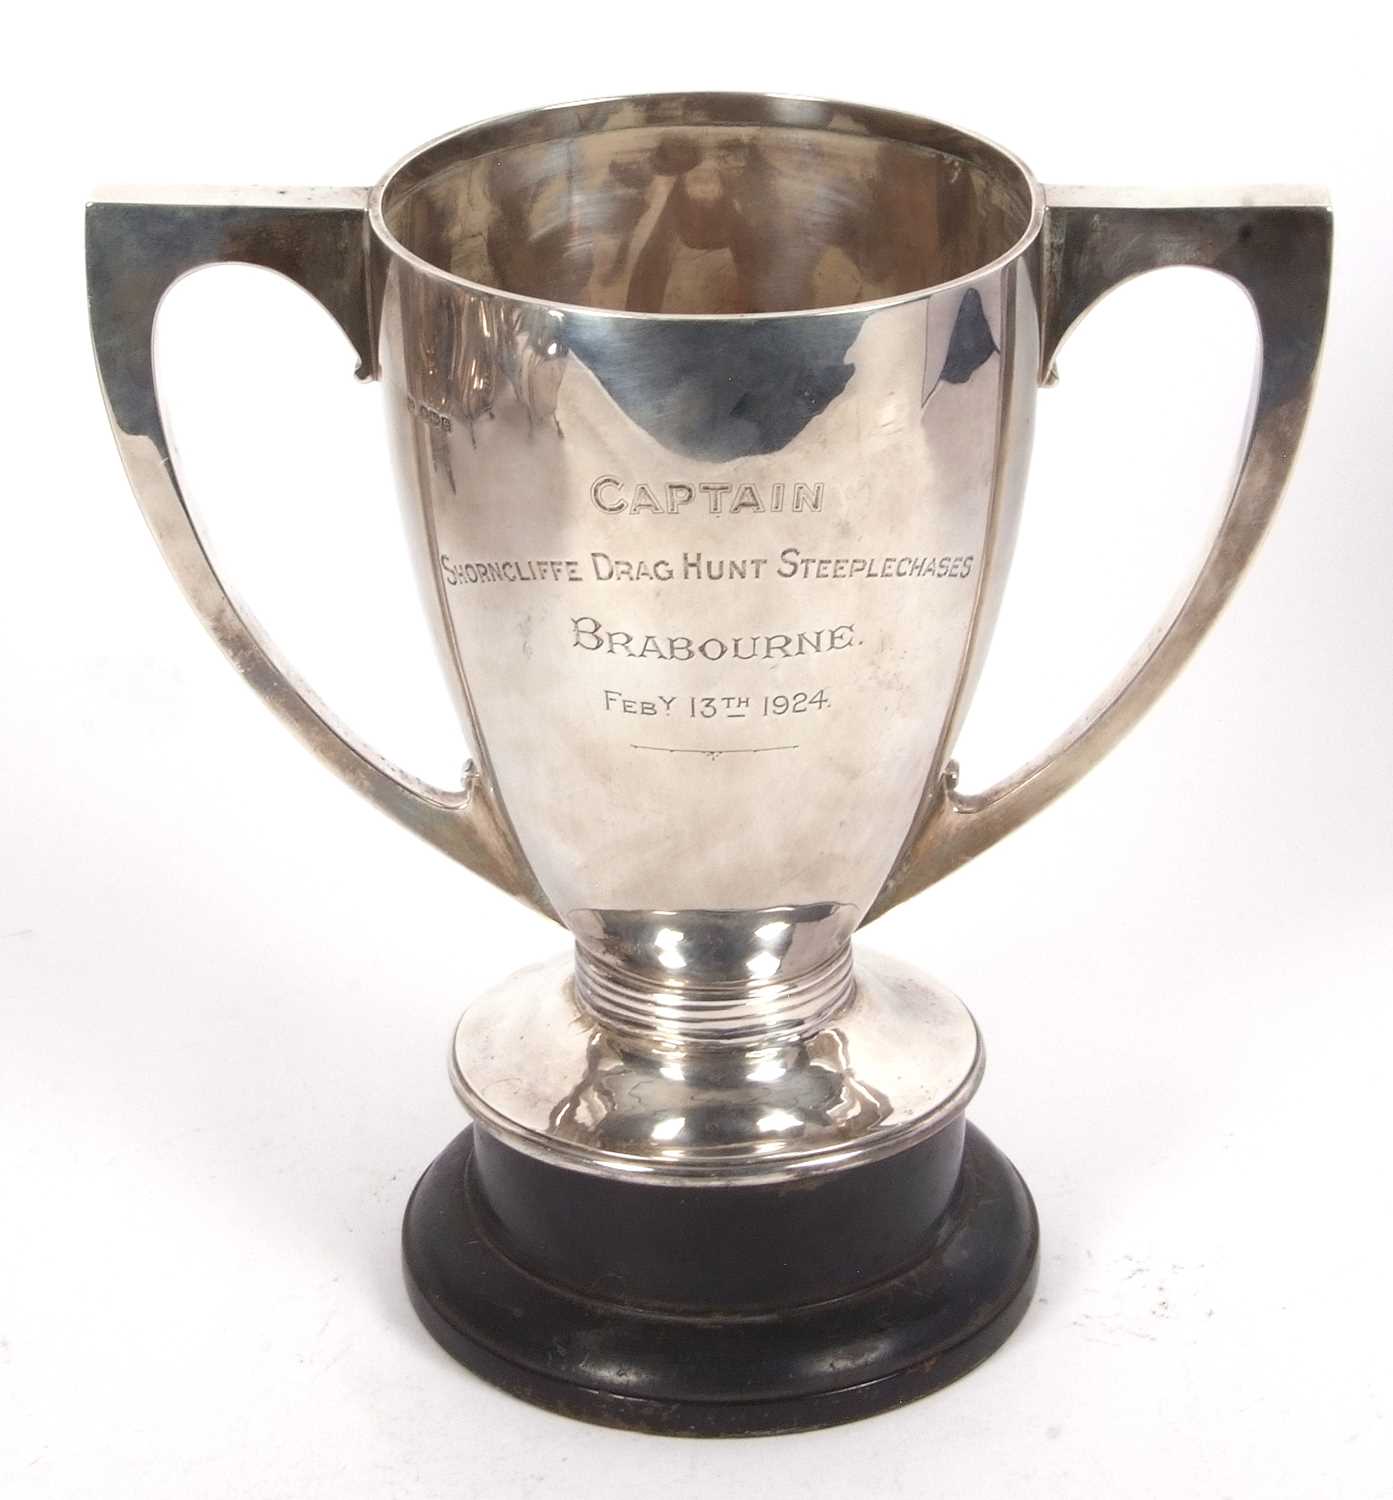 George V silver twin handled trophy engraved "Captain Seancliff Drag Hunt Steeple Chasers,